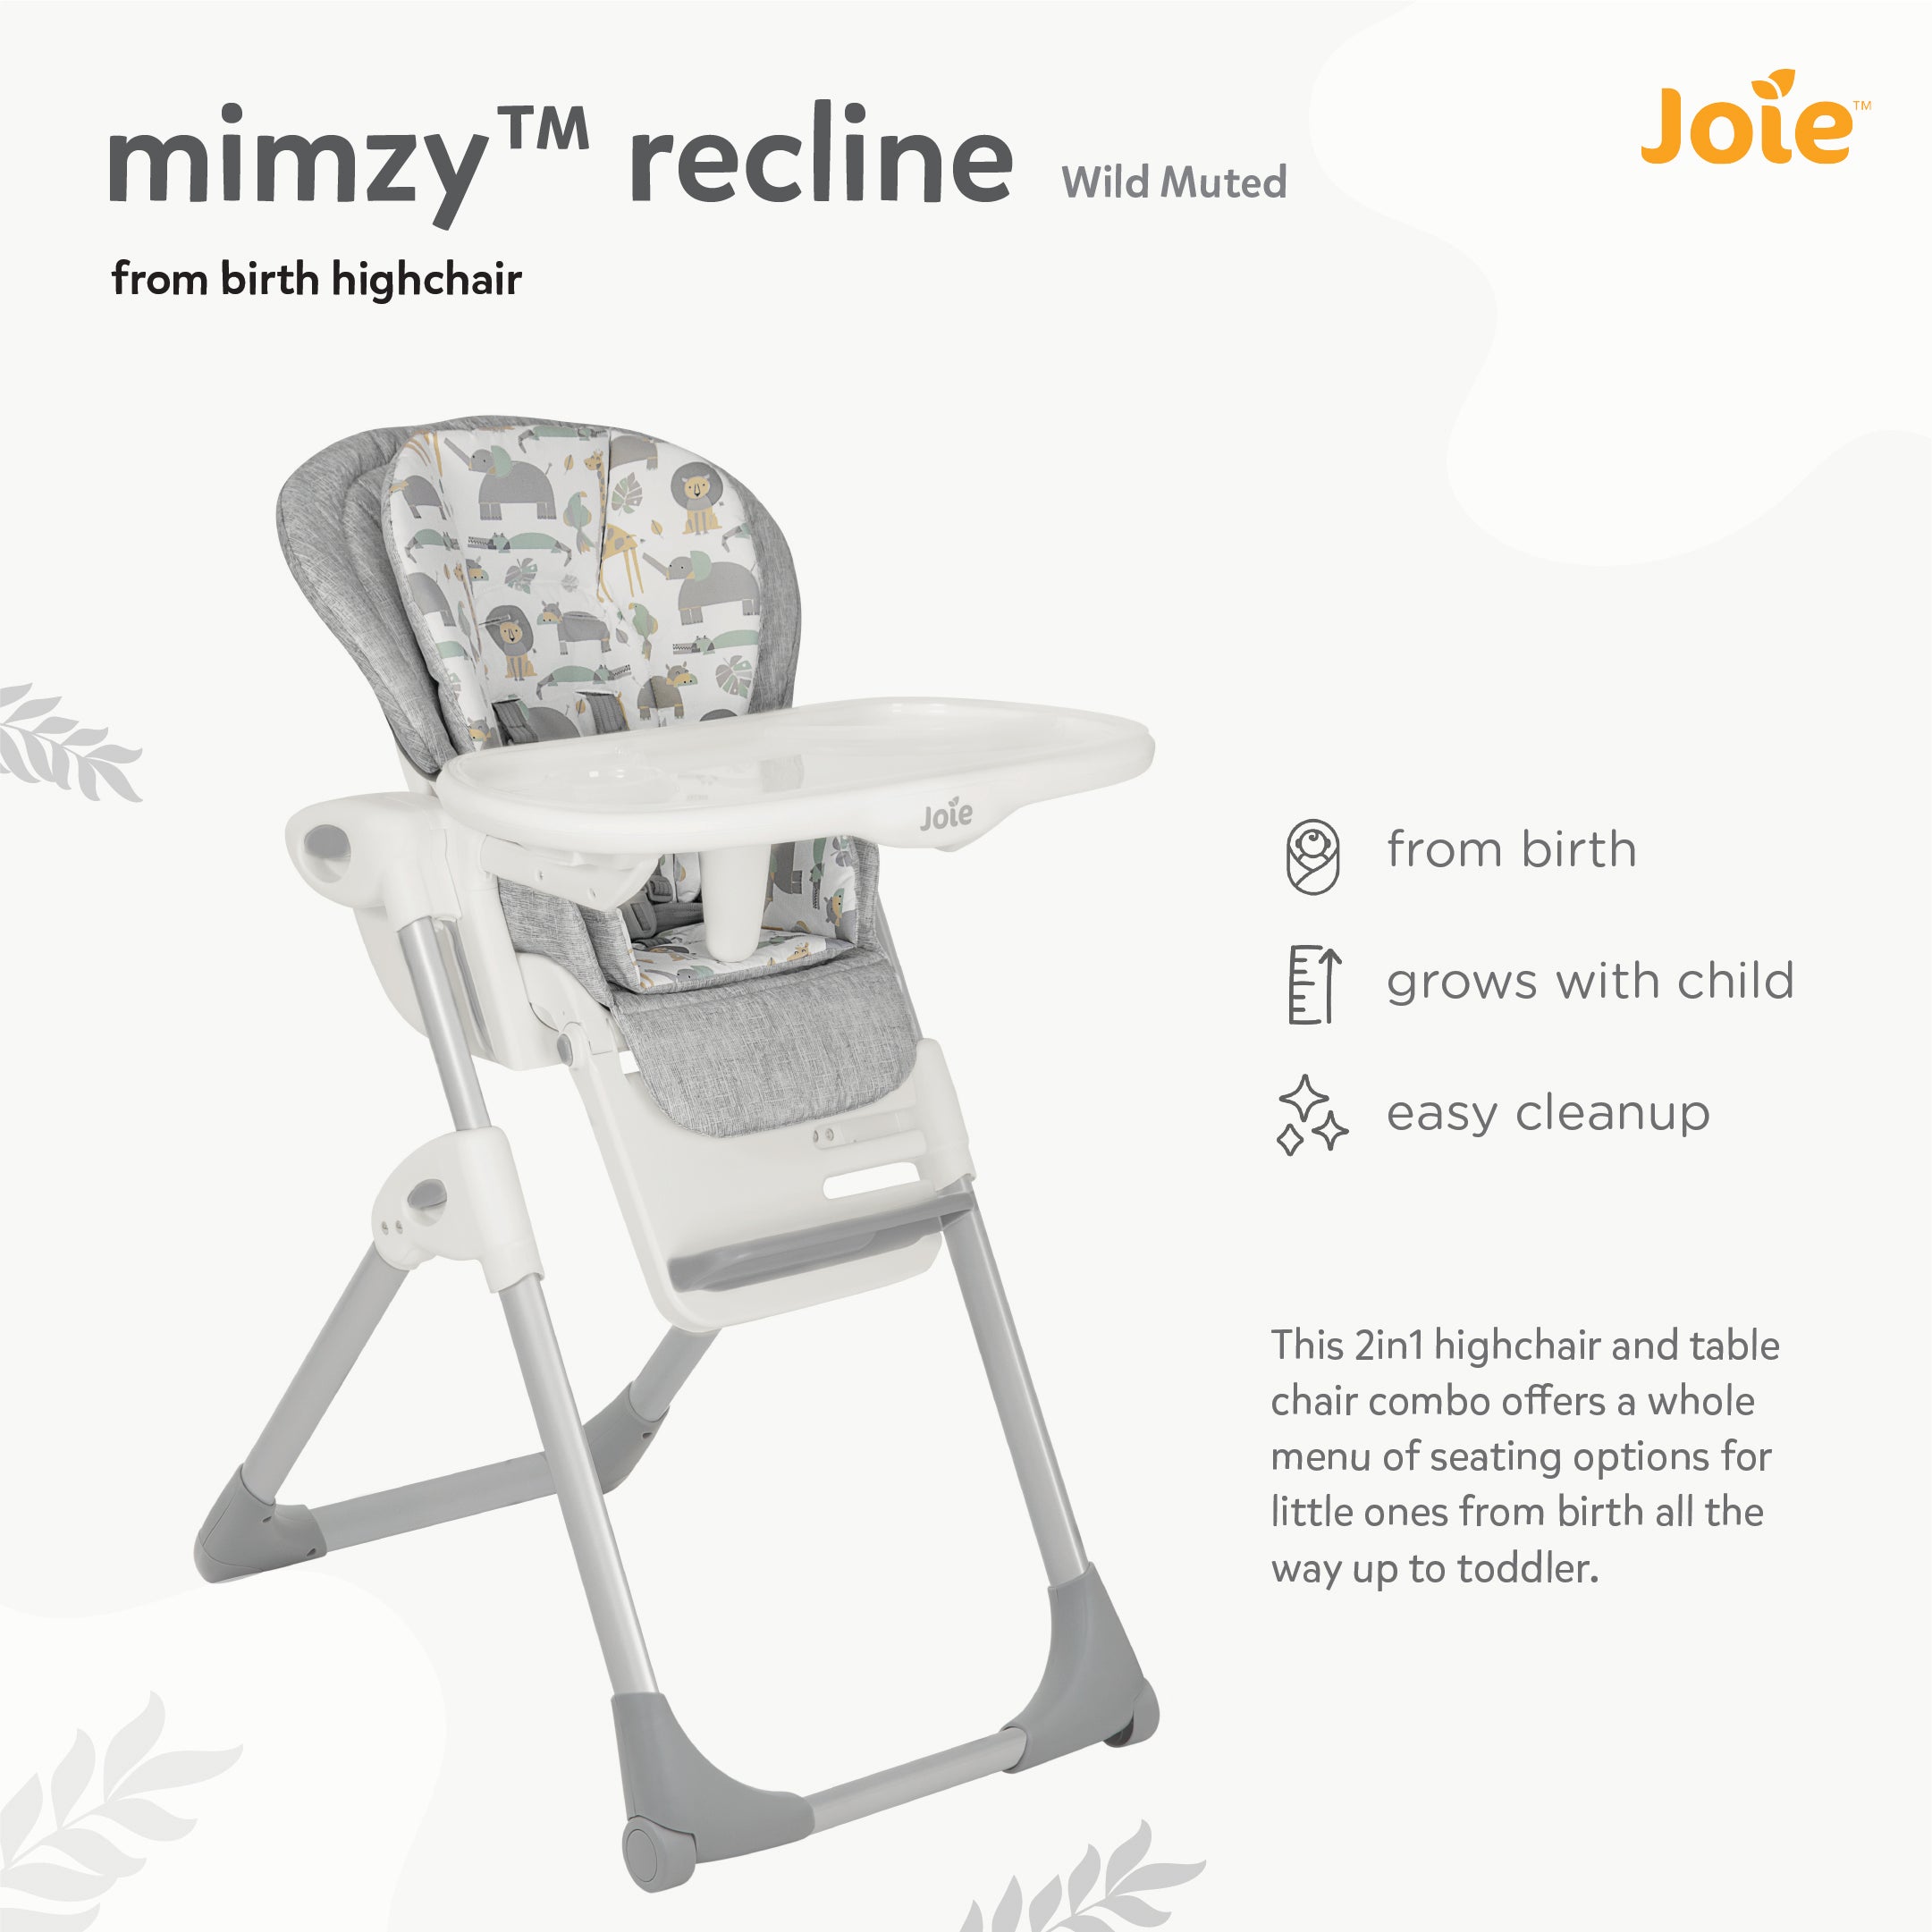 JOIE High Chair Mimzy Recline Wild Muted Birth+ to 15 Kgs